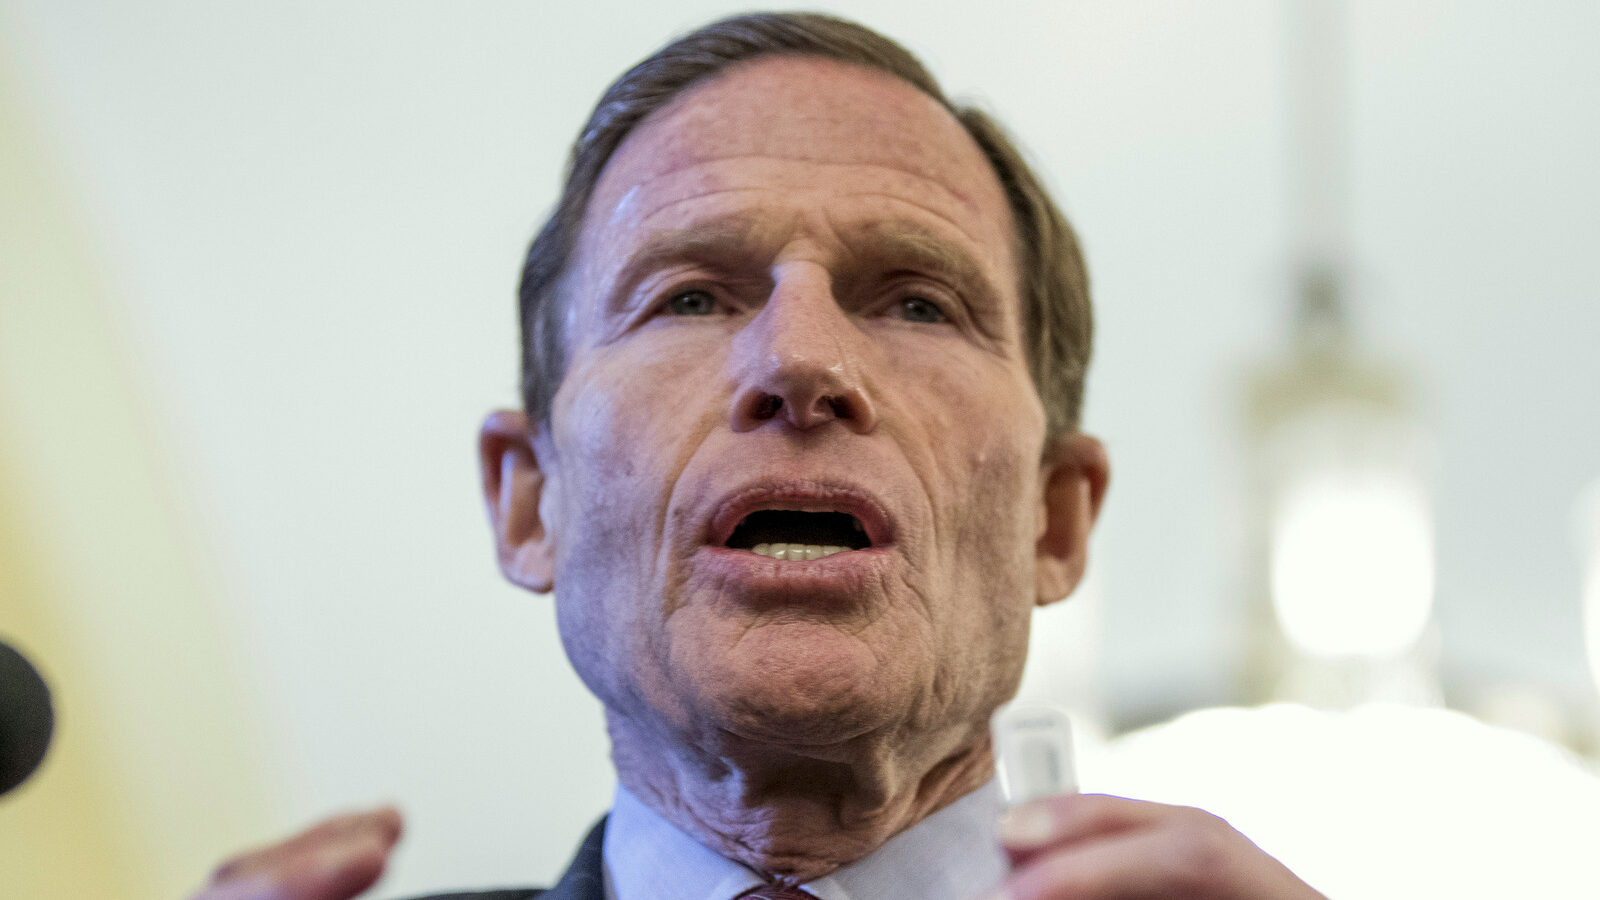 Sen. Richard Blumenthal, D-Conn. holds a thumb drive during a news conference on Capitol Hill in Washington, Tuesday, Feb. 7, 2017, with petitions calling for the Senate to reject Attorney General-designate Sen. Jeff Sessions, R-Ala. (AP/Andrew Harnik)